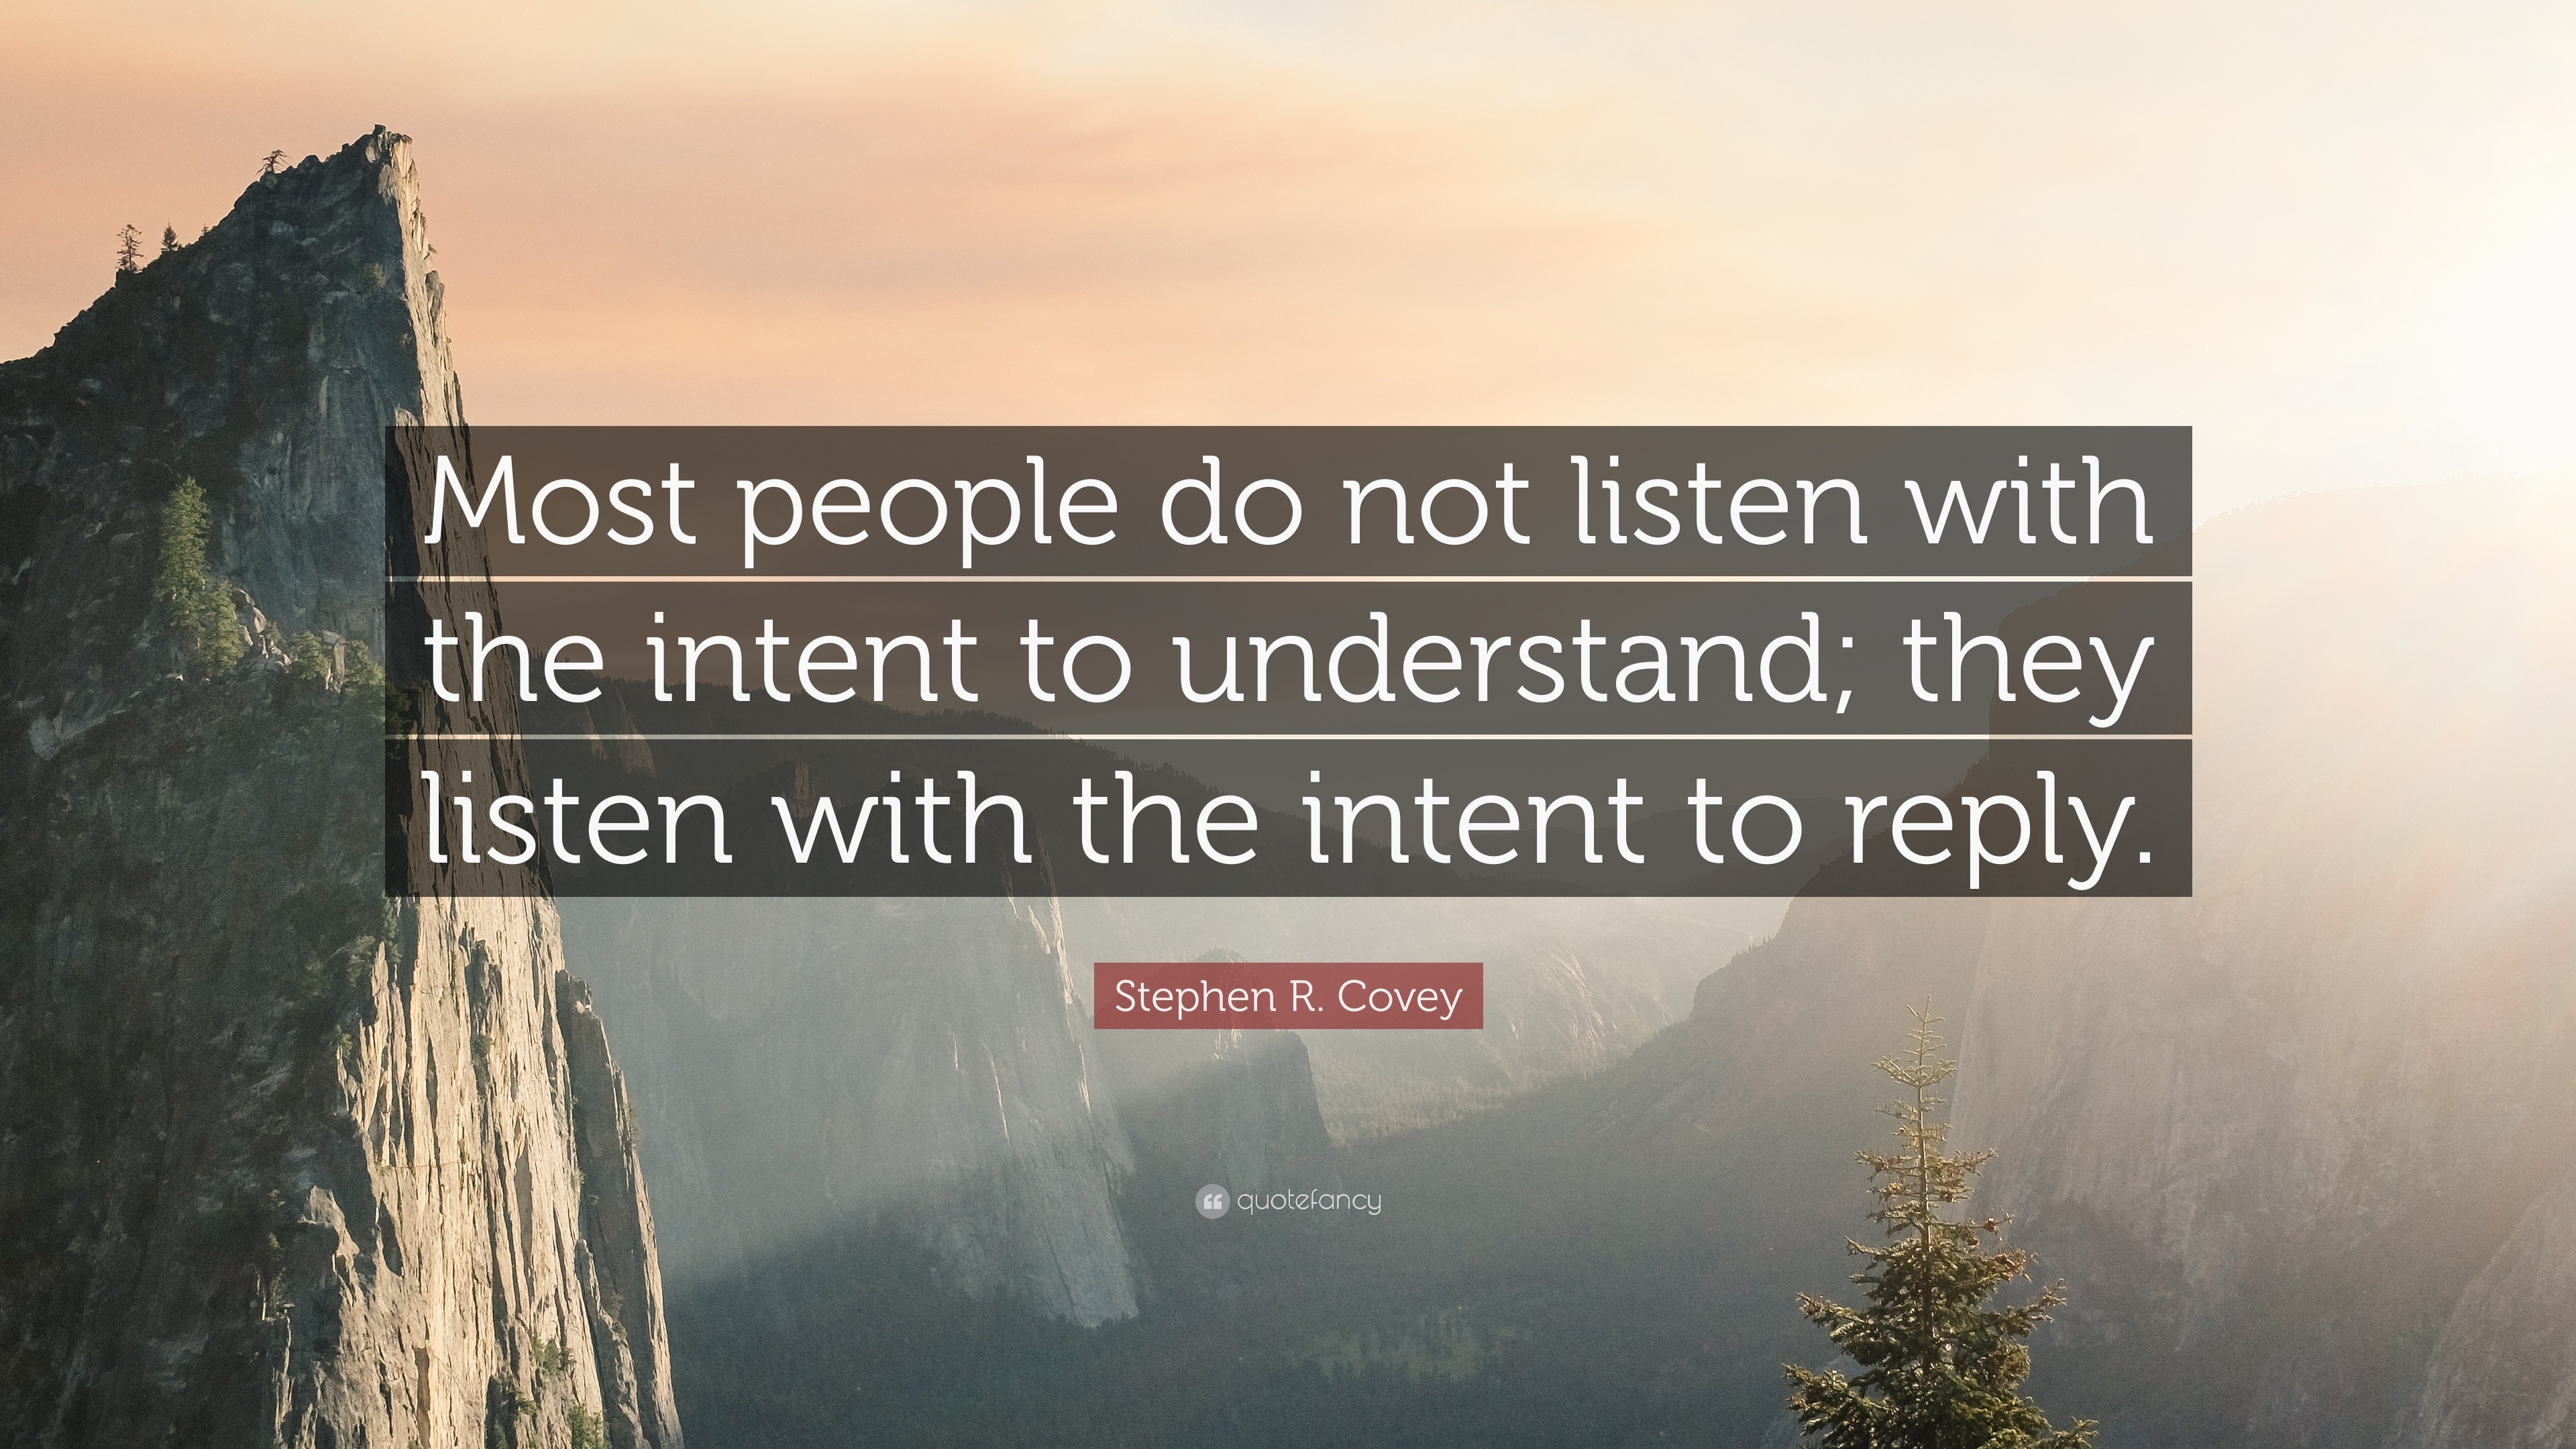 Stephen R. Covey Quote: “Most people do not listen with the intent to ...